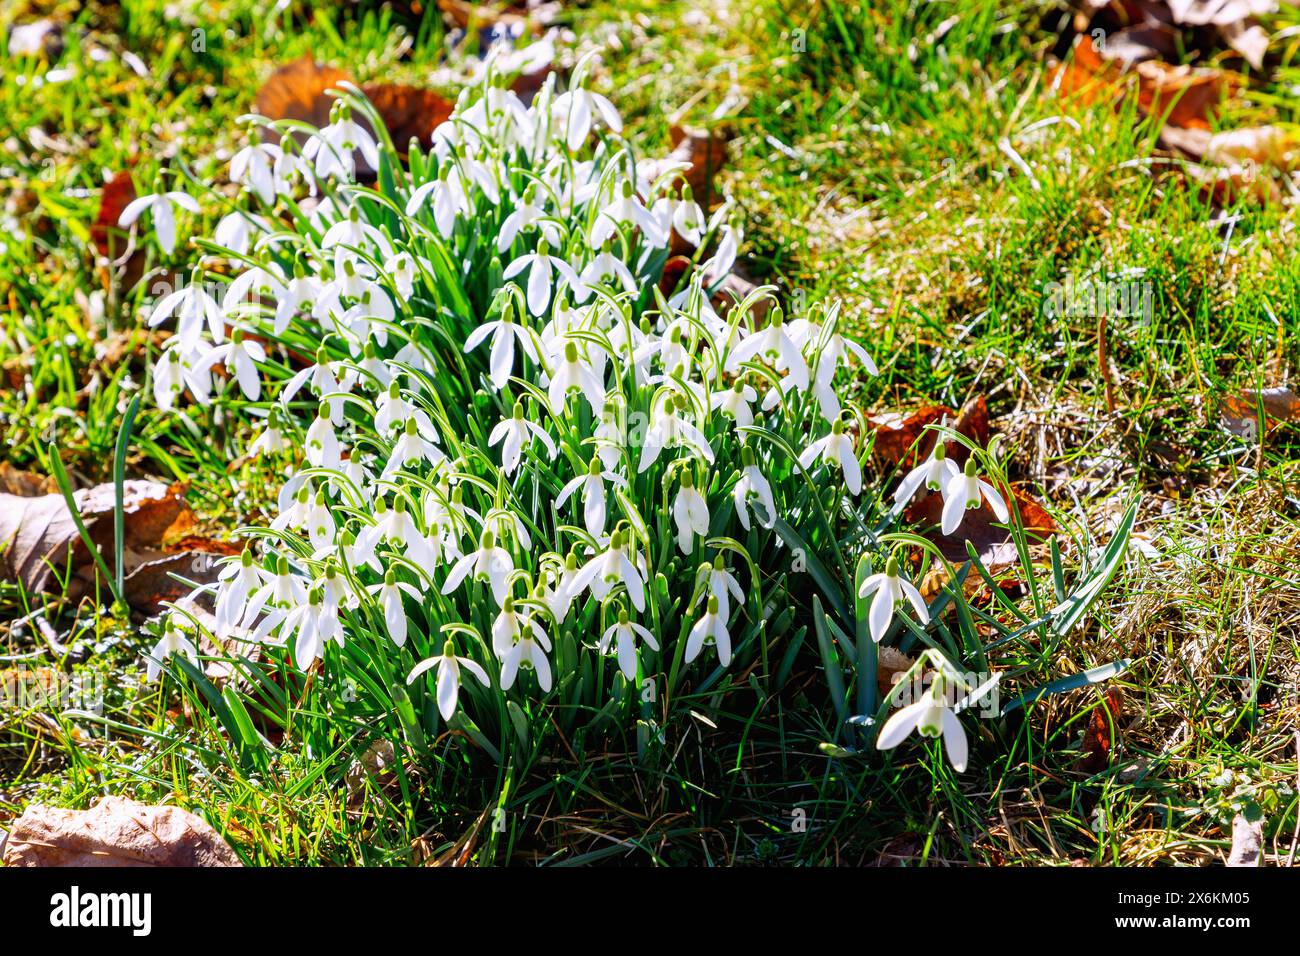 Snowdrops (Galanthus) in the grass between autumn leaves Stock Photo